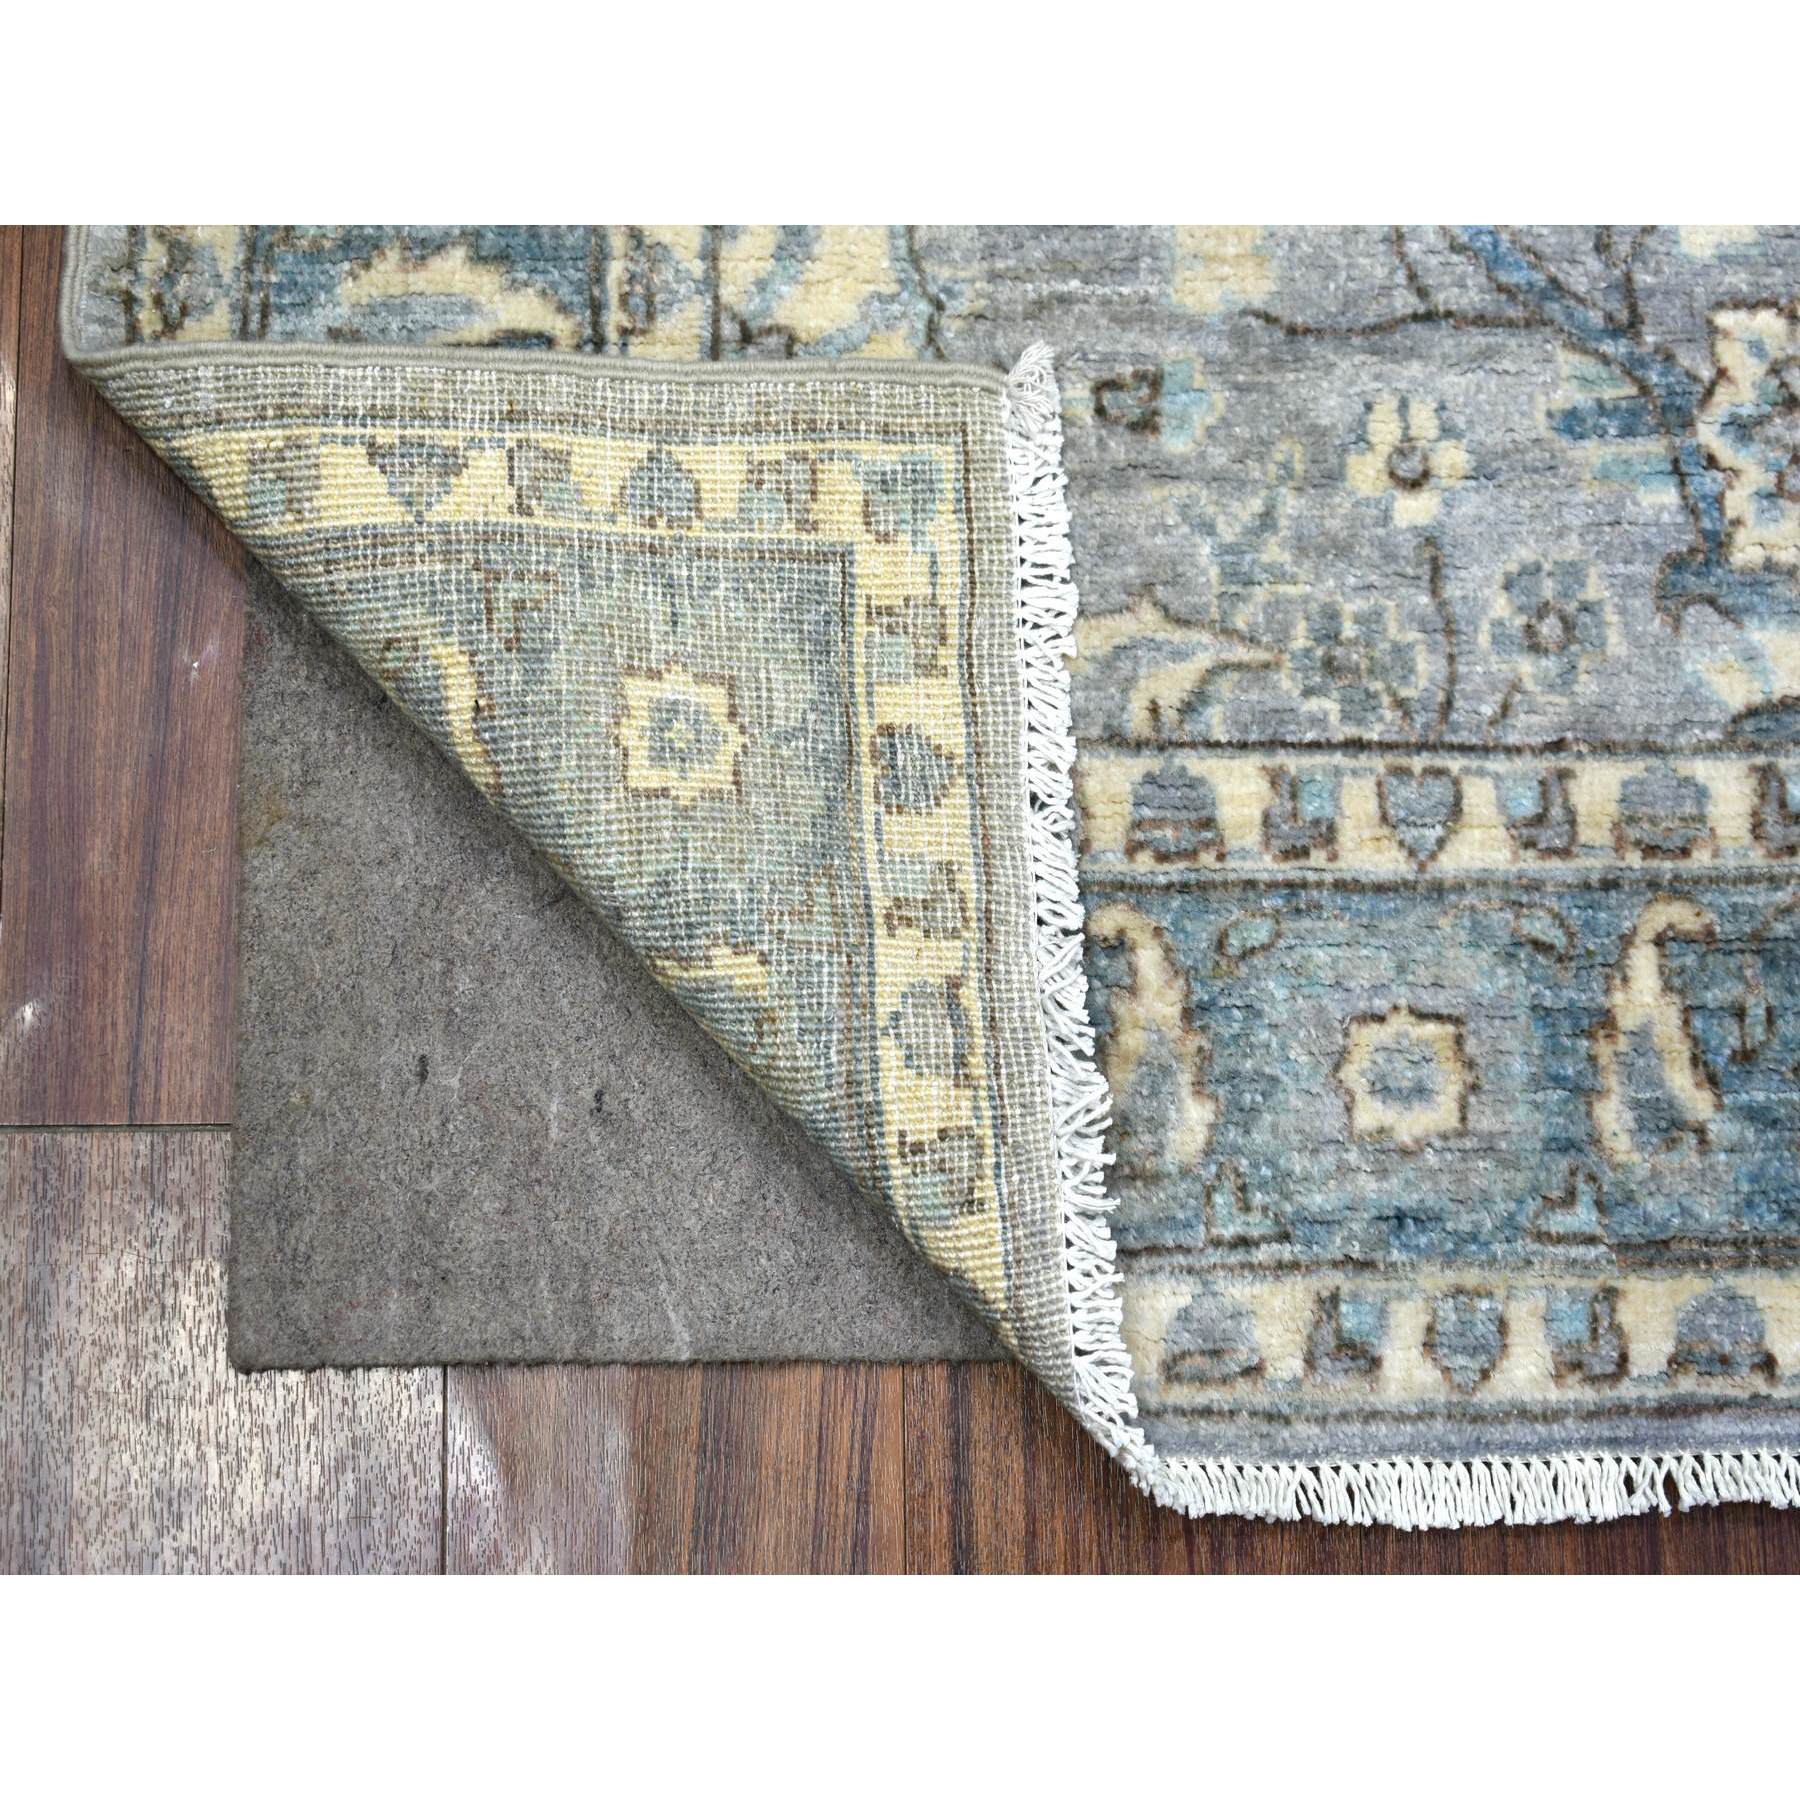 4'x5'10" Gray, Hand Woven Fine Peshawar with All Over Design, Densely Woven Organic Wool, Wide Runner Oriental Rug 